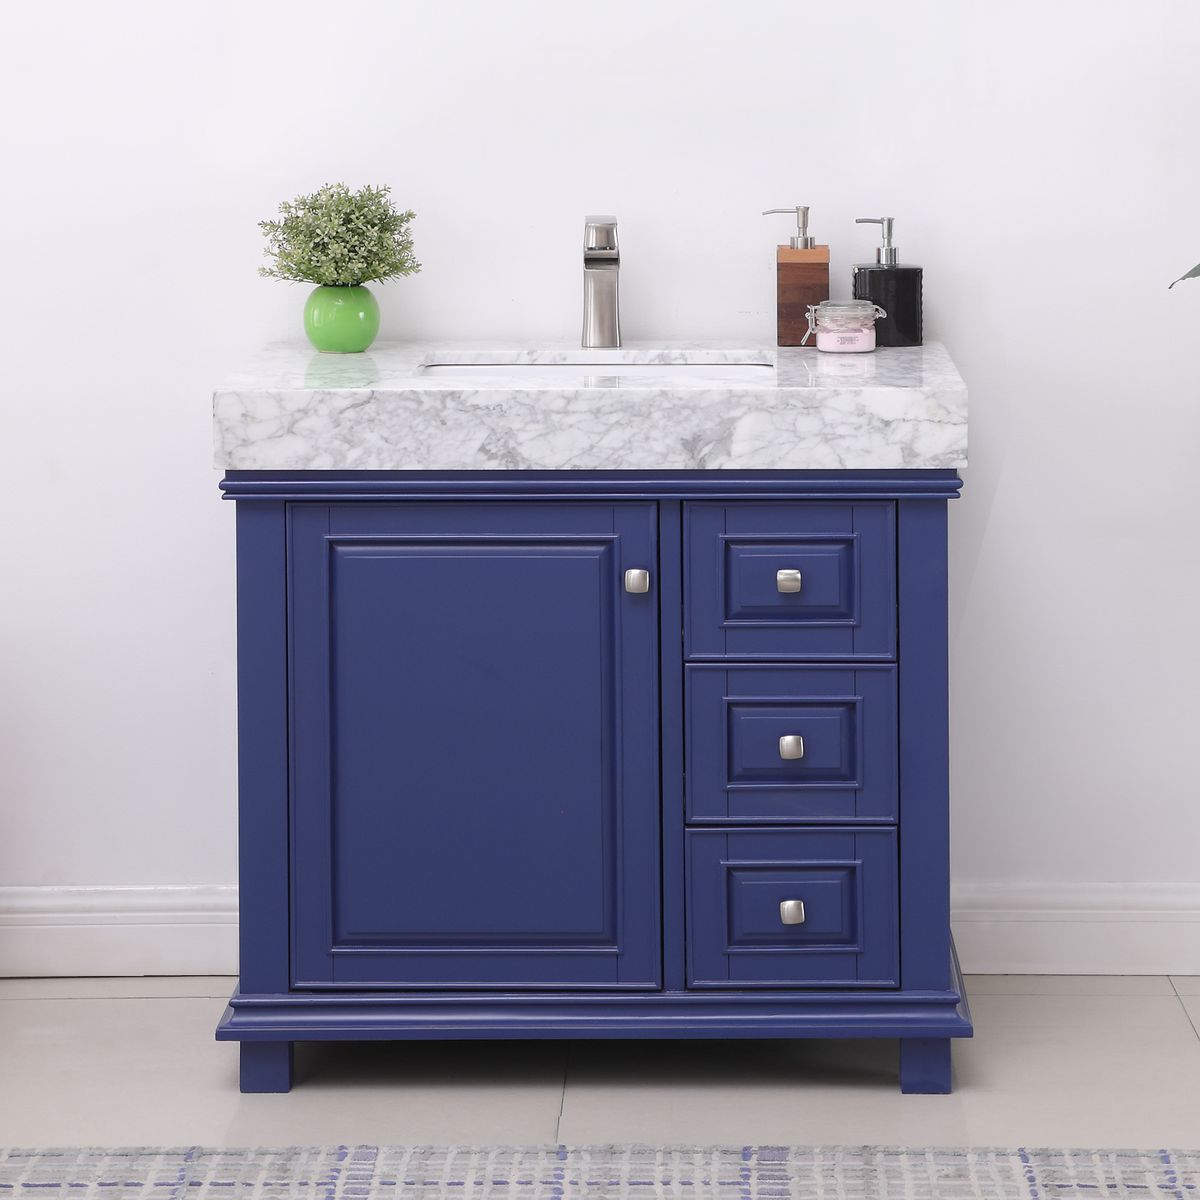 Issac Edwards Collection 36" Single Bathroom Vanity Set in Jewelry Blue and Carrara White Marble Countertop without Mirror